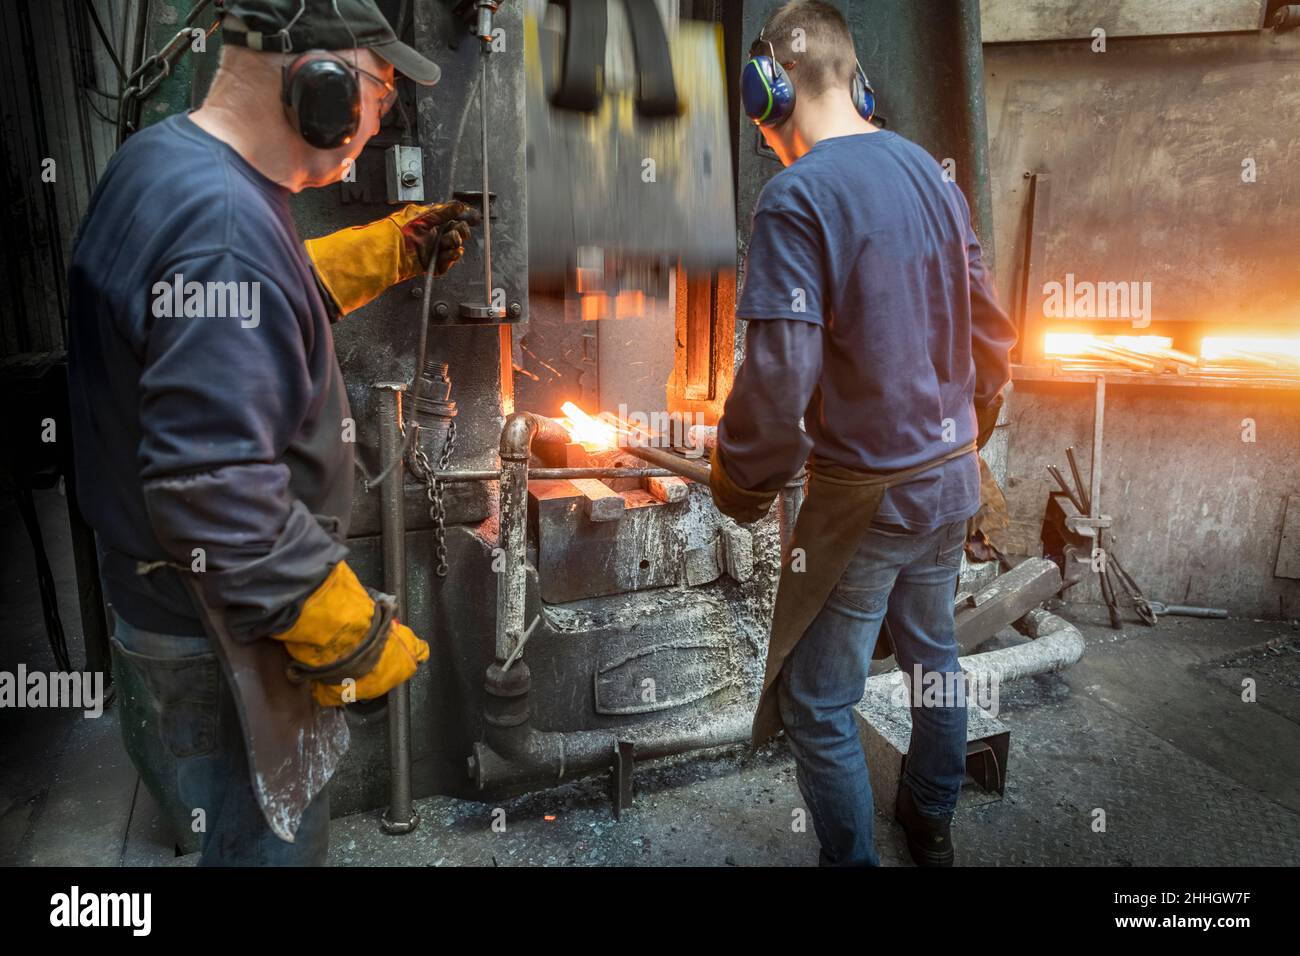 Engineer with apprentice forging steel parts in hammer press in industrial forge Stock Photo